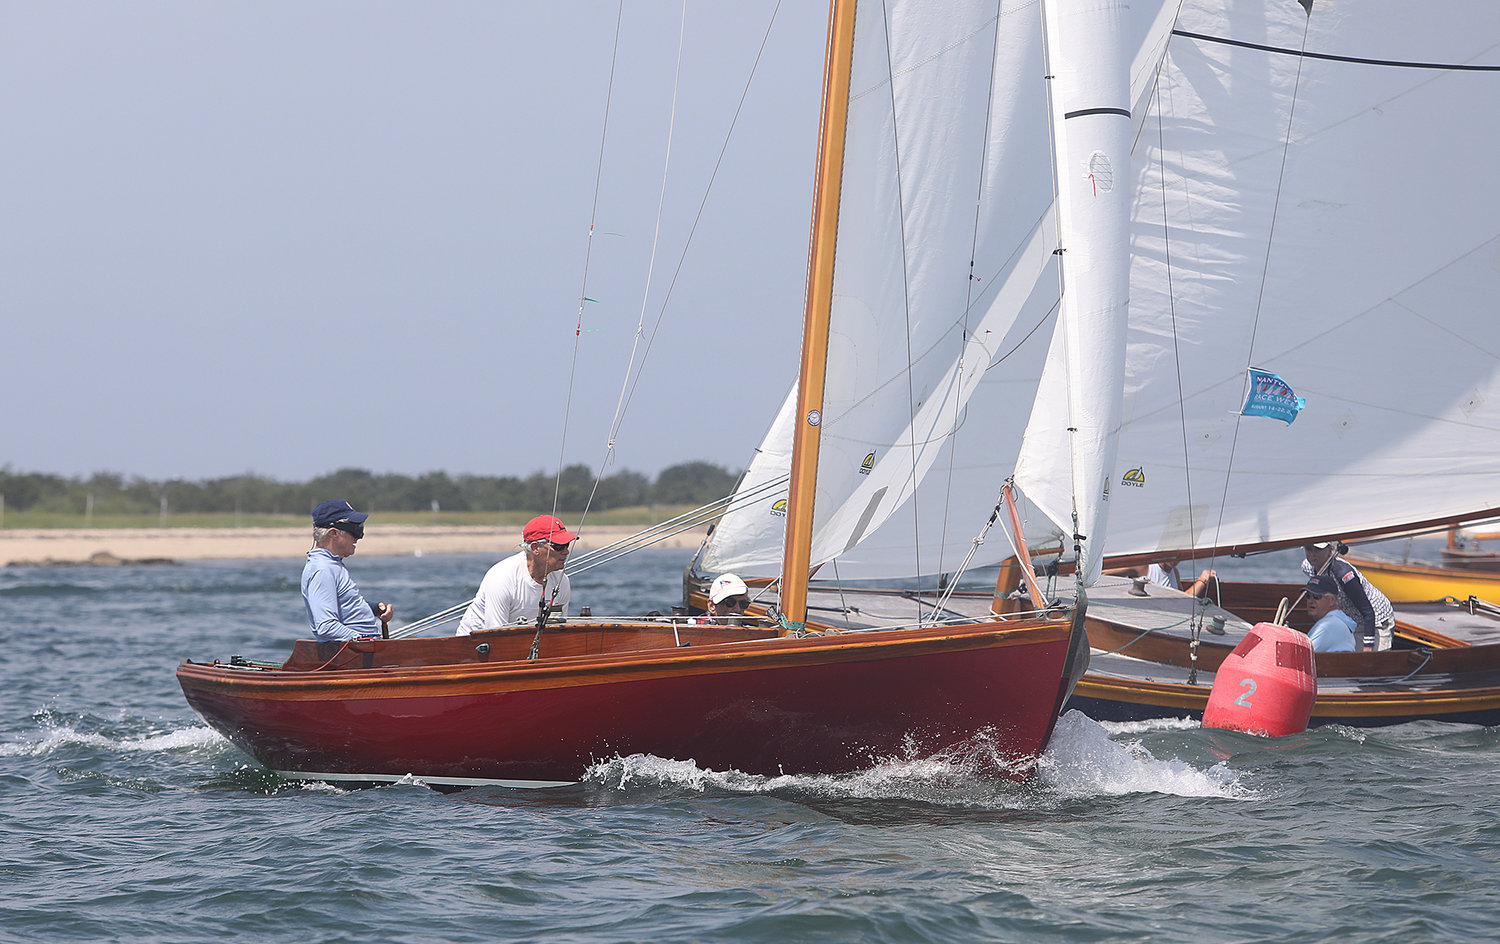 One-design racing on the first day of Nantucket Race Week Saturday.